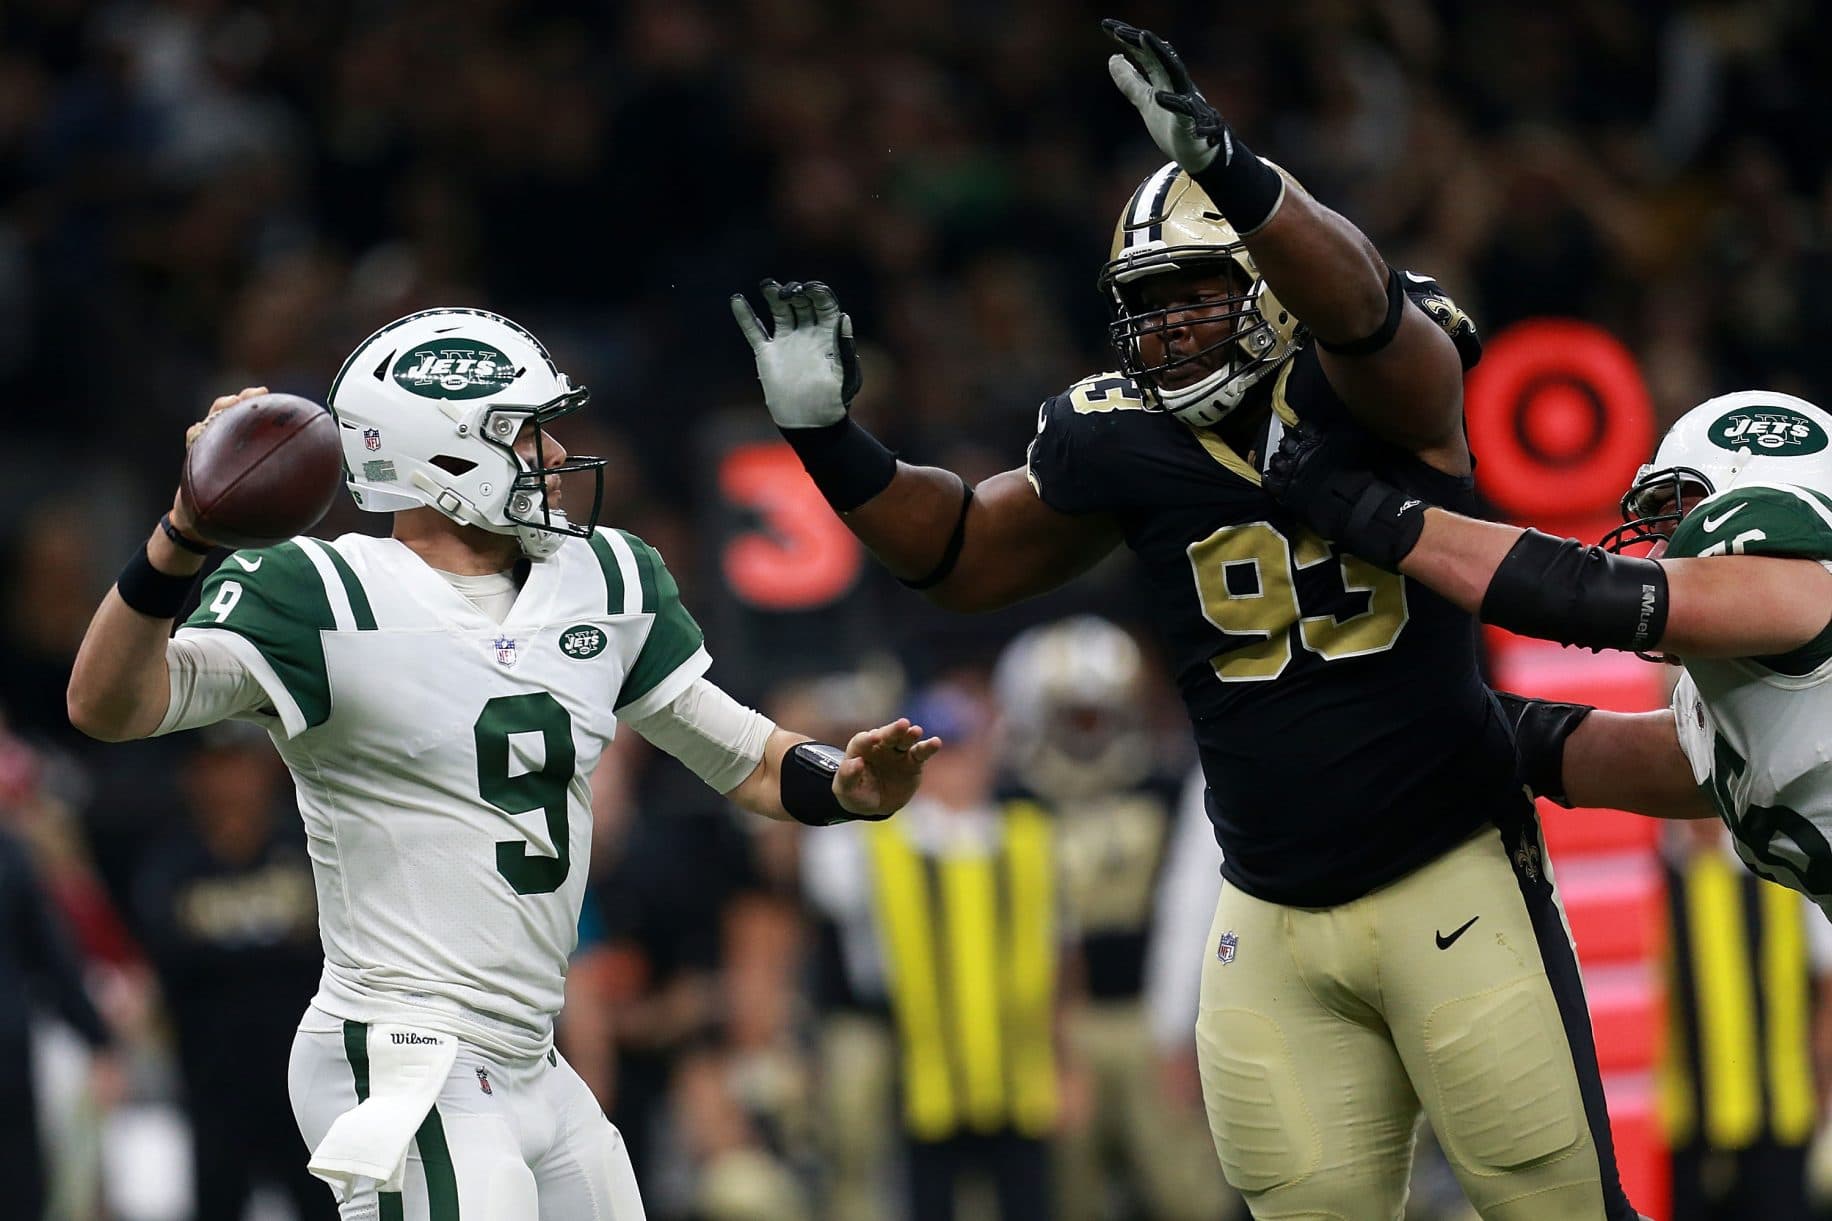 The New York Jets offense fails in New Orleans with Bryce Petty